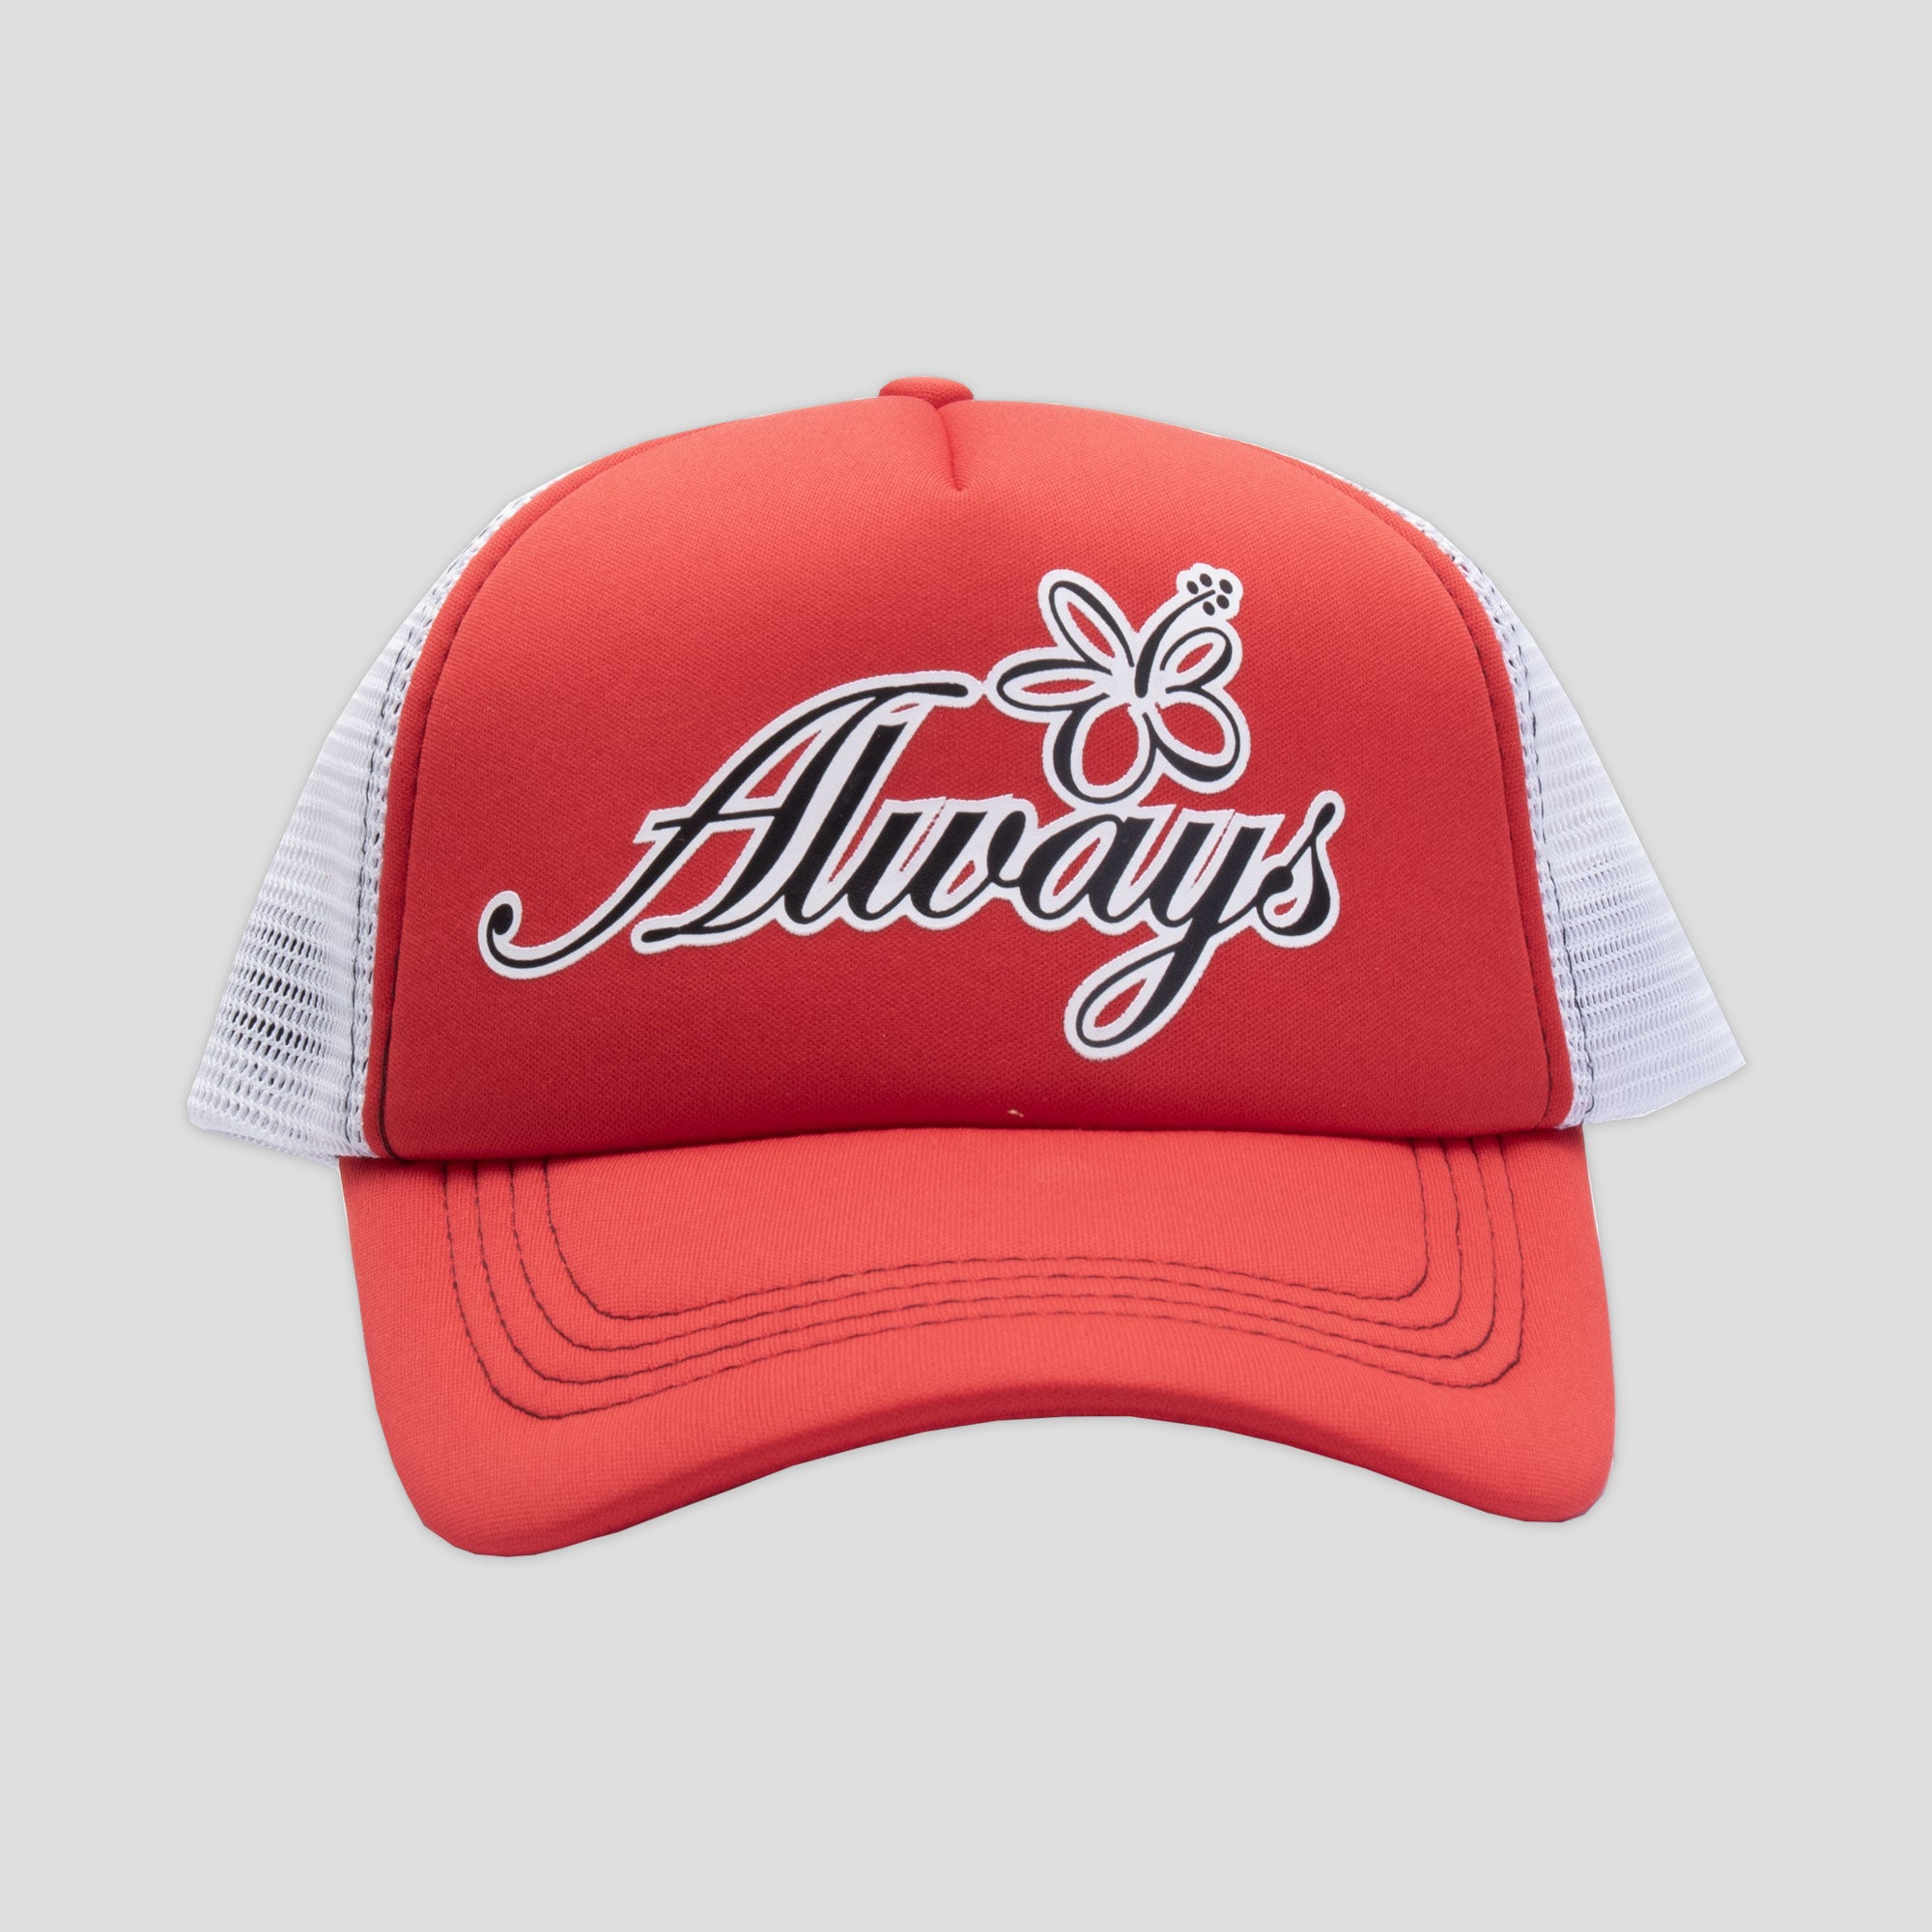 Always Do What You Should Do Flowering Mesh Trucker Cap - Red